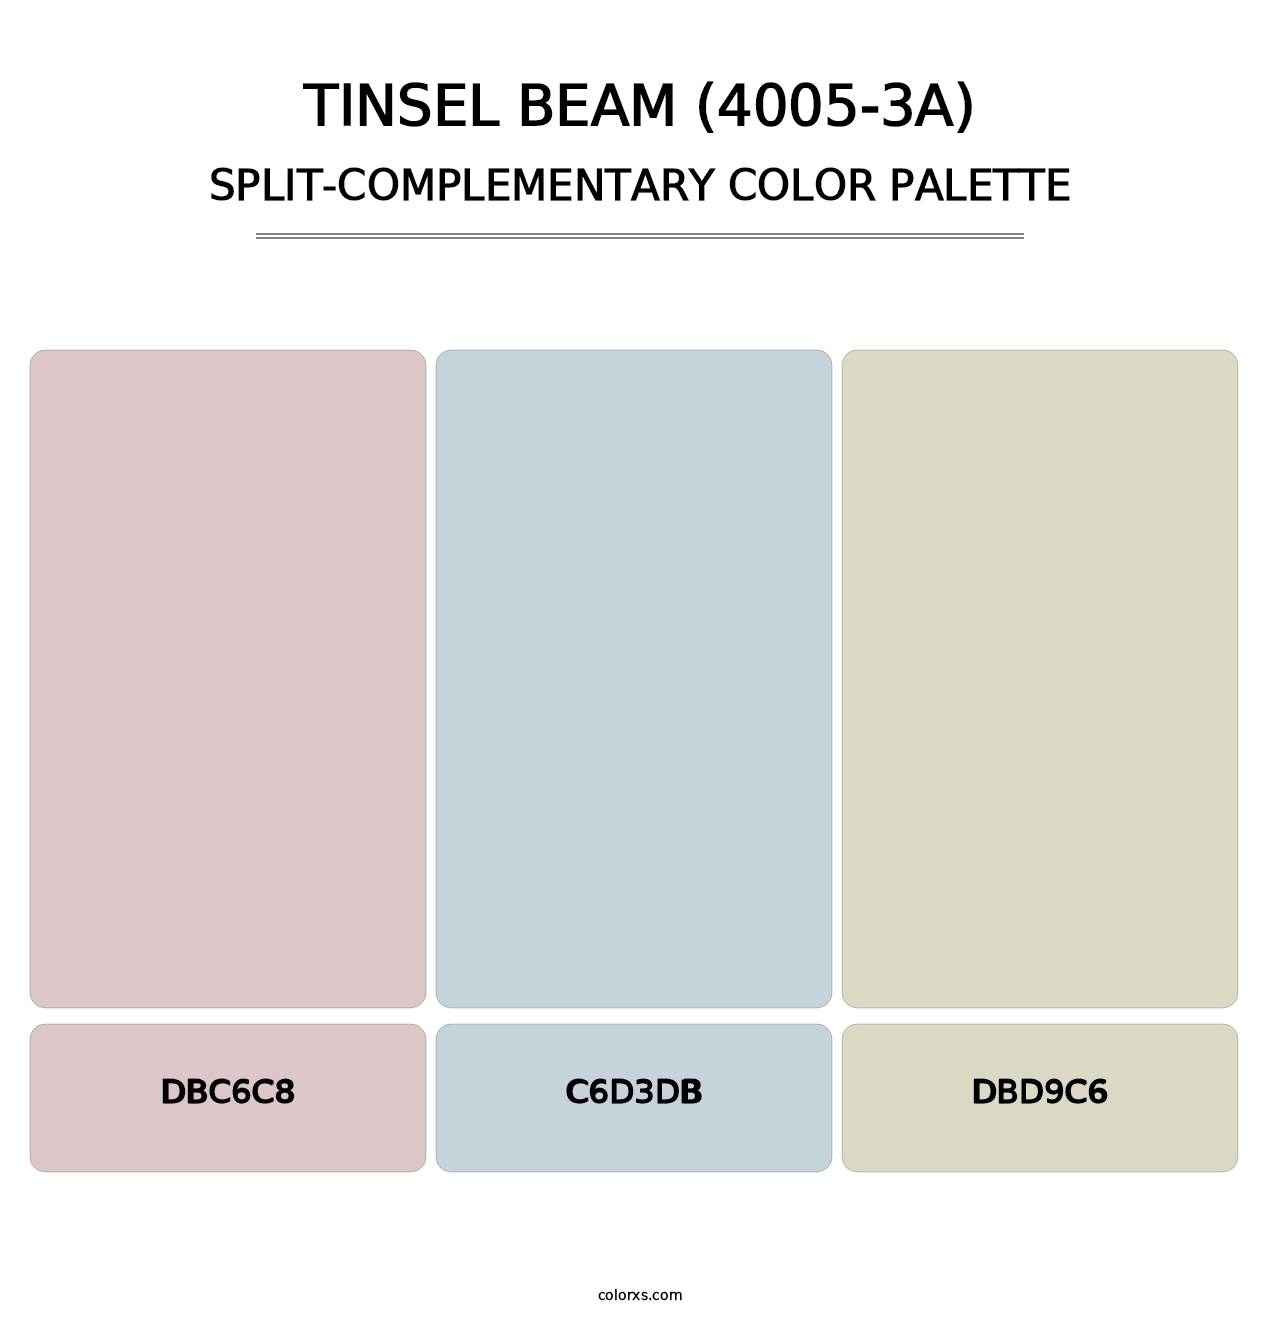 Tinsel Beam (4005-3A) - Split-Complementary Color Palette